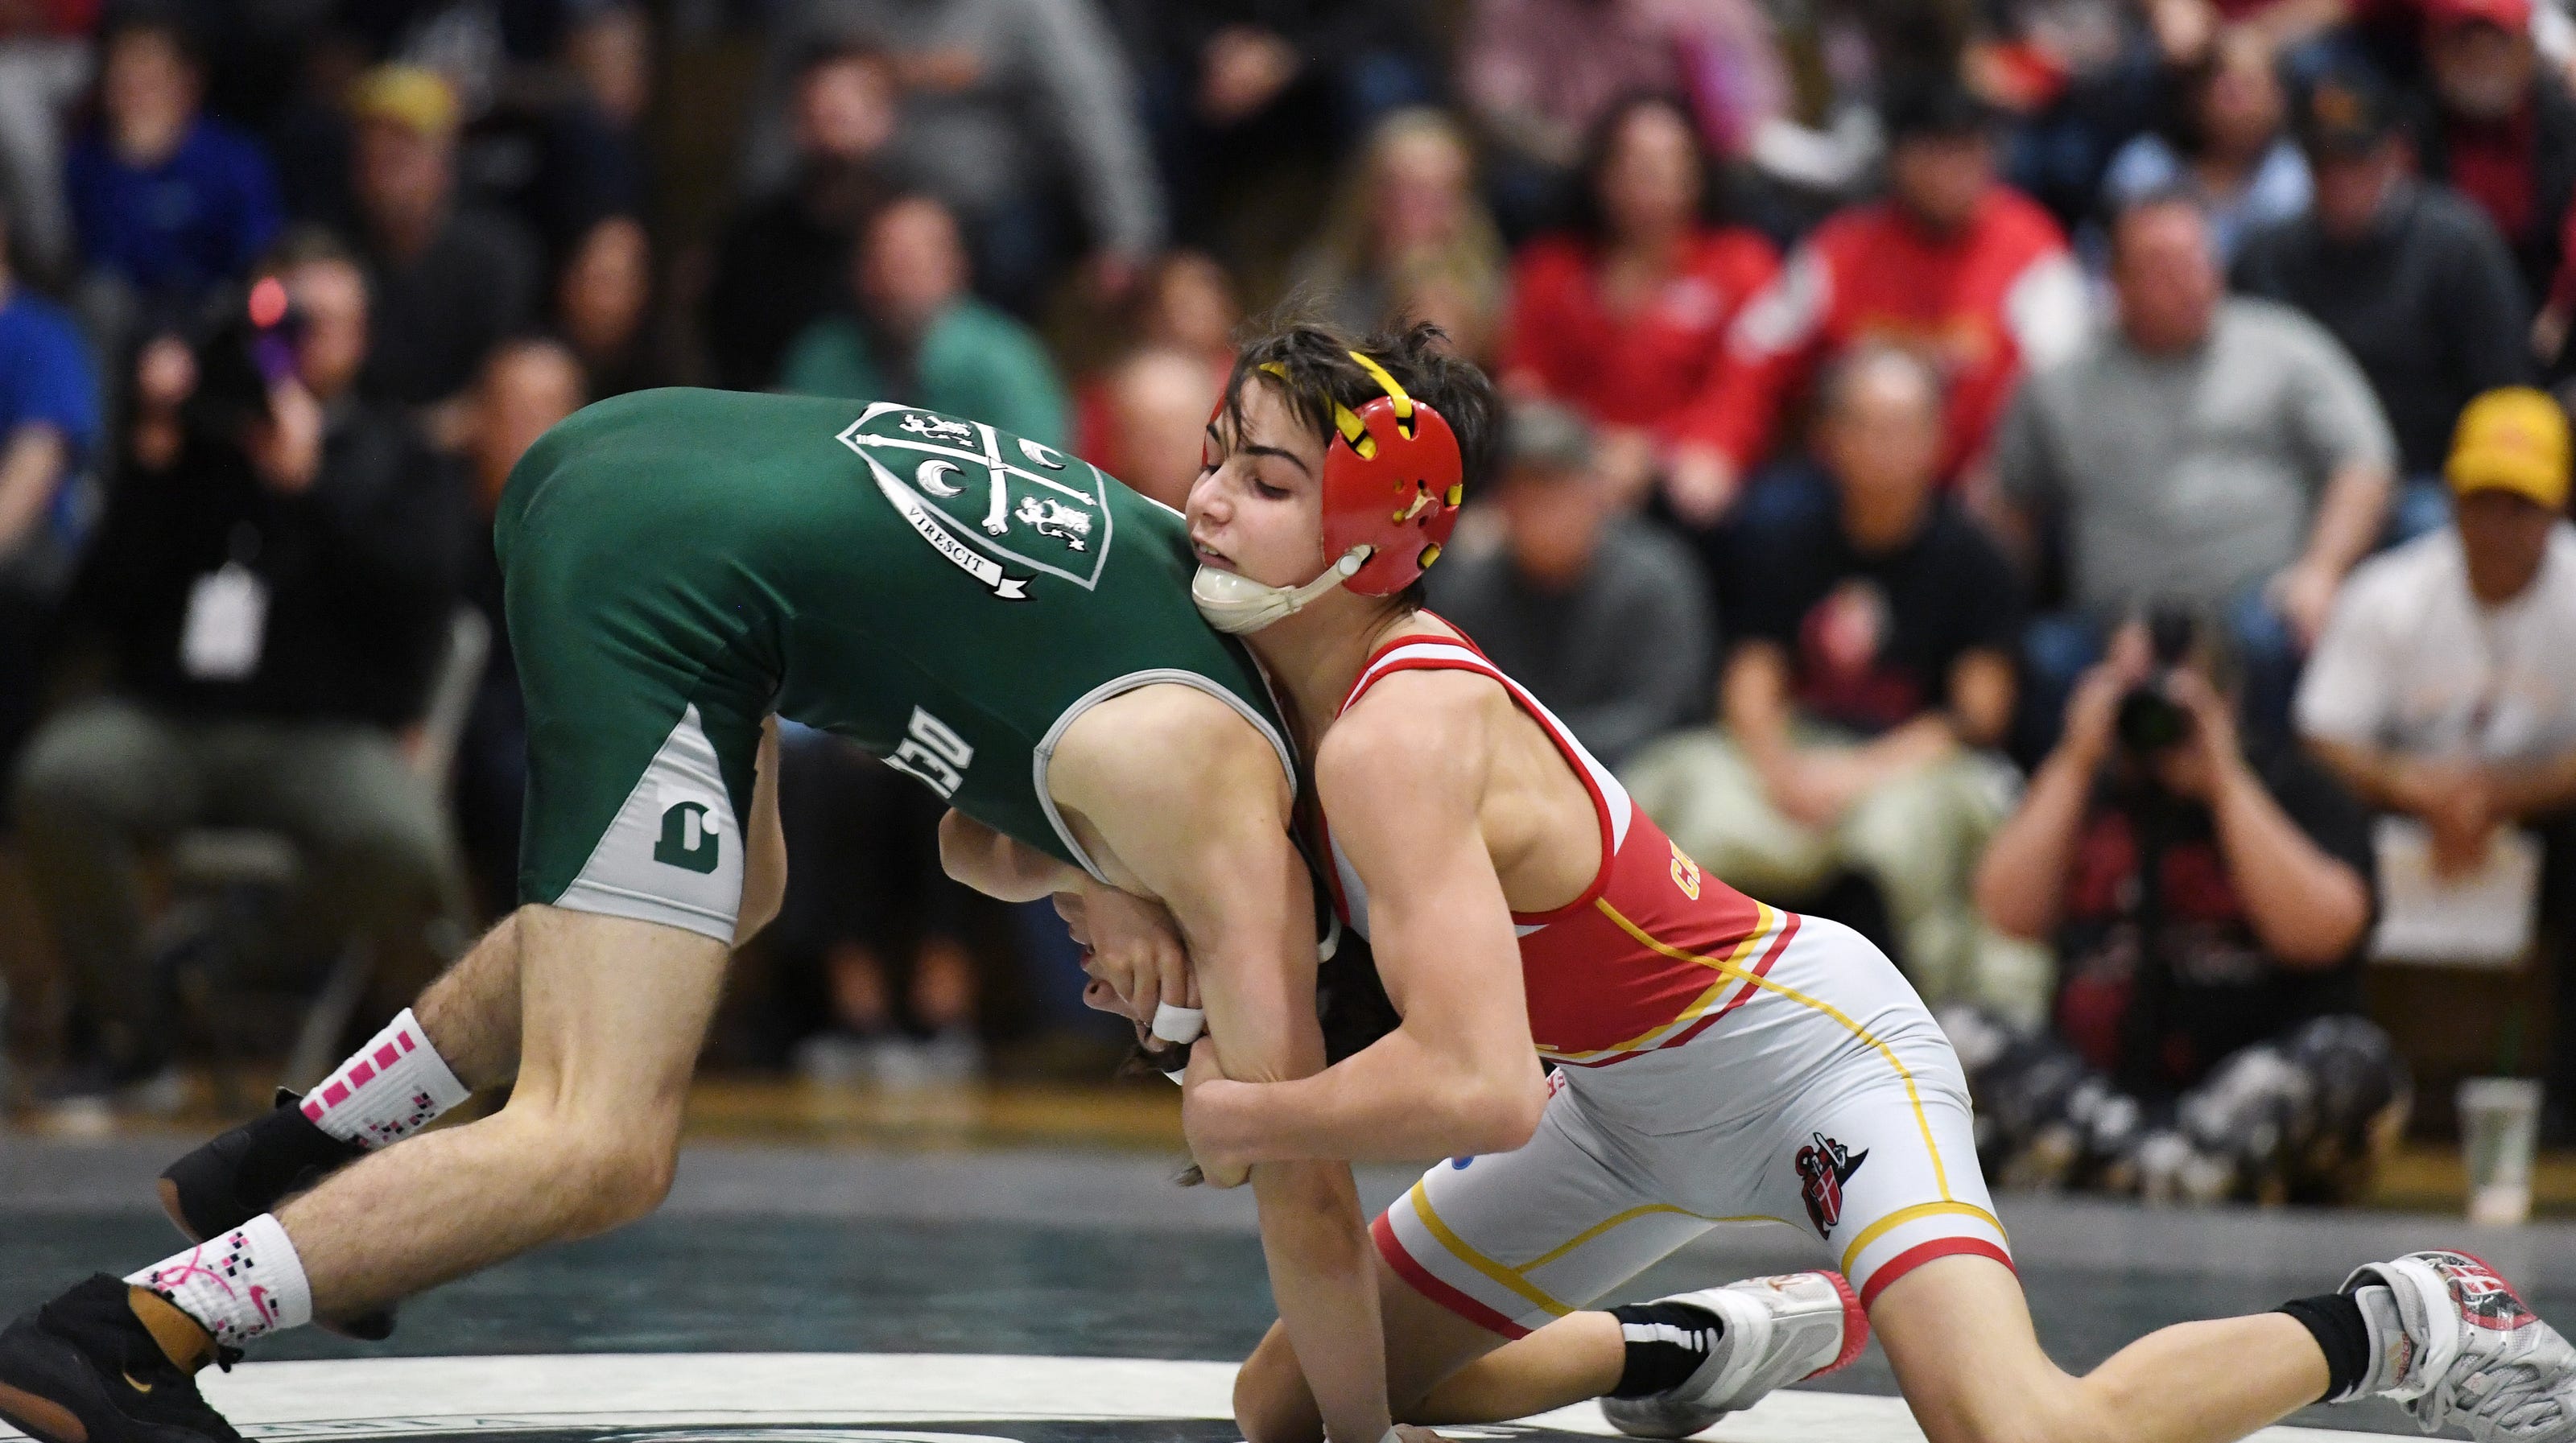 NJ wrestling 5 storylines to watch in the state team tournament